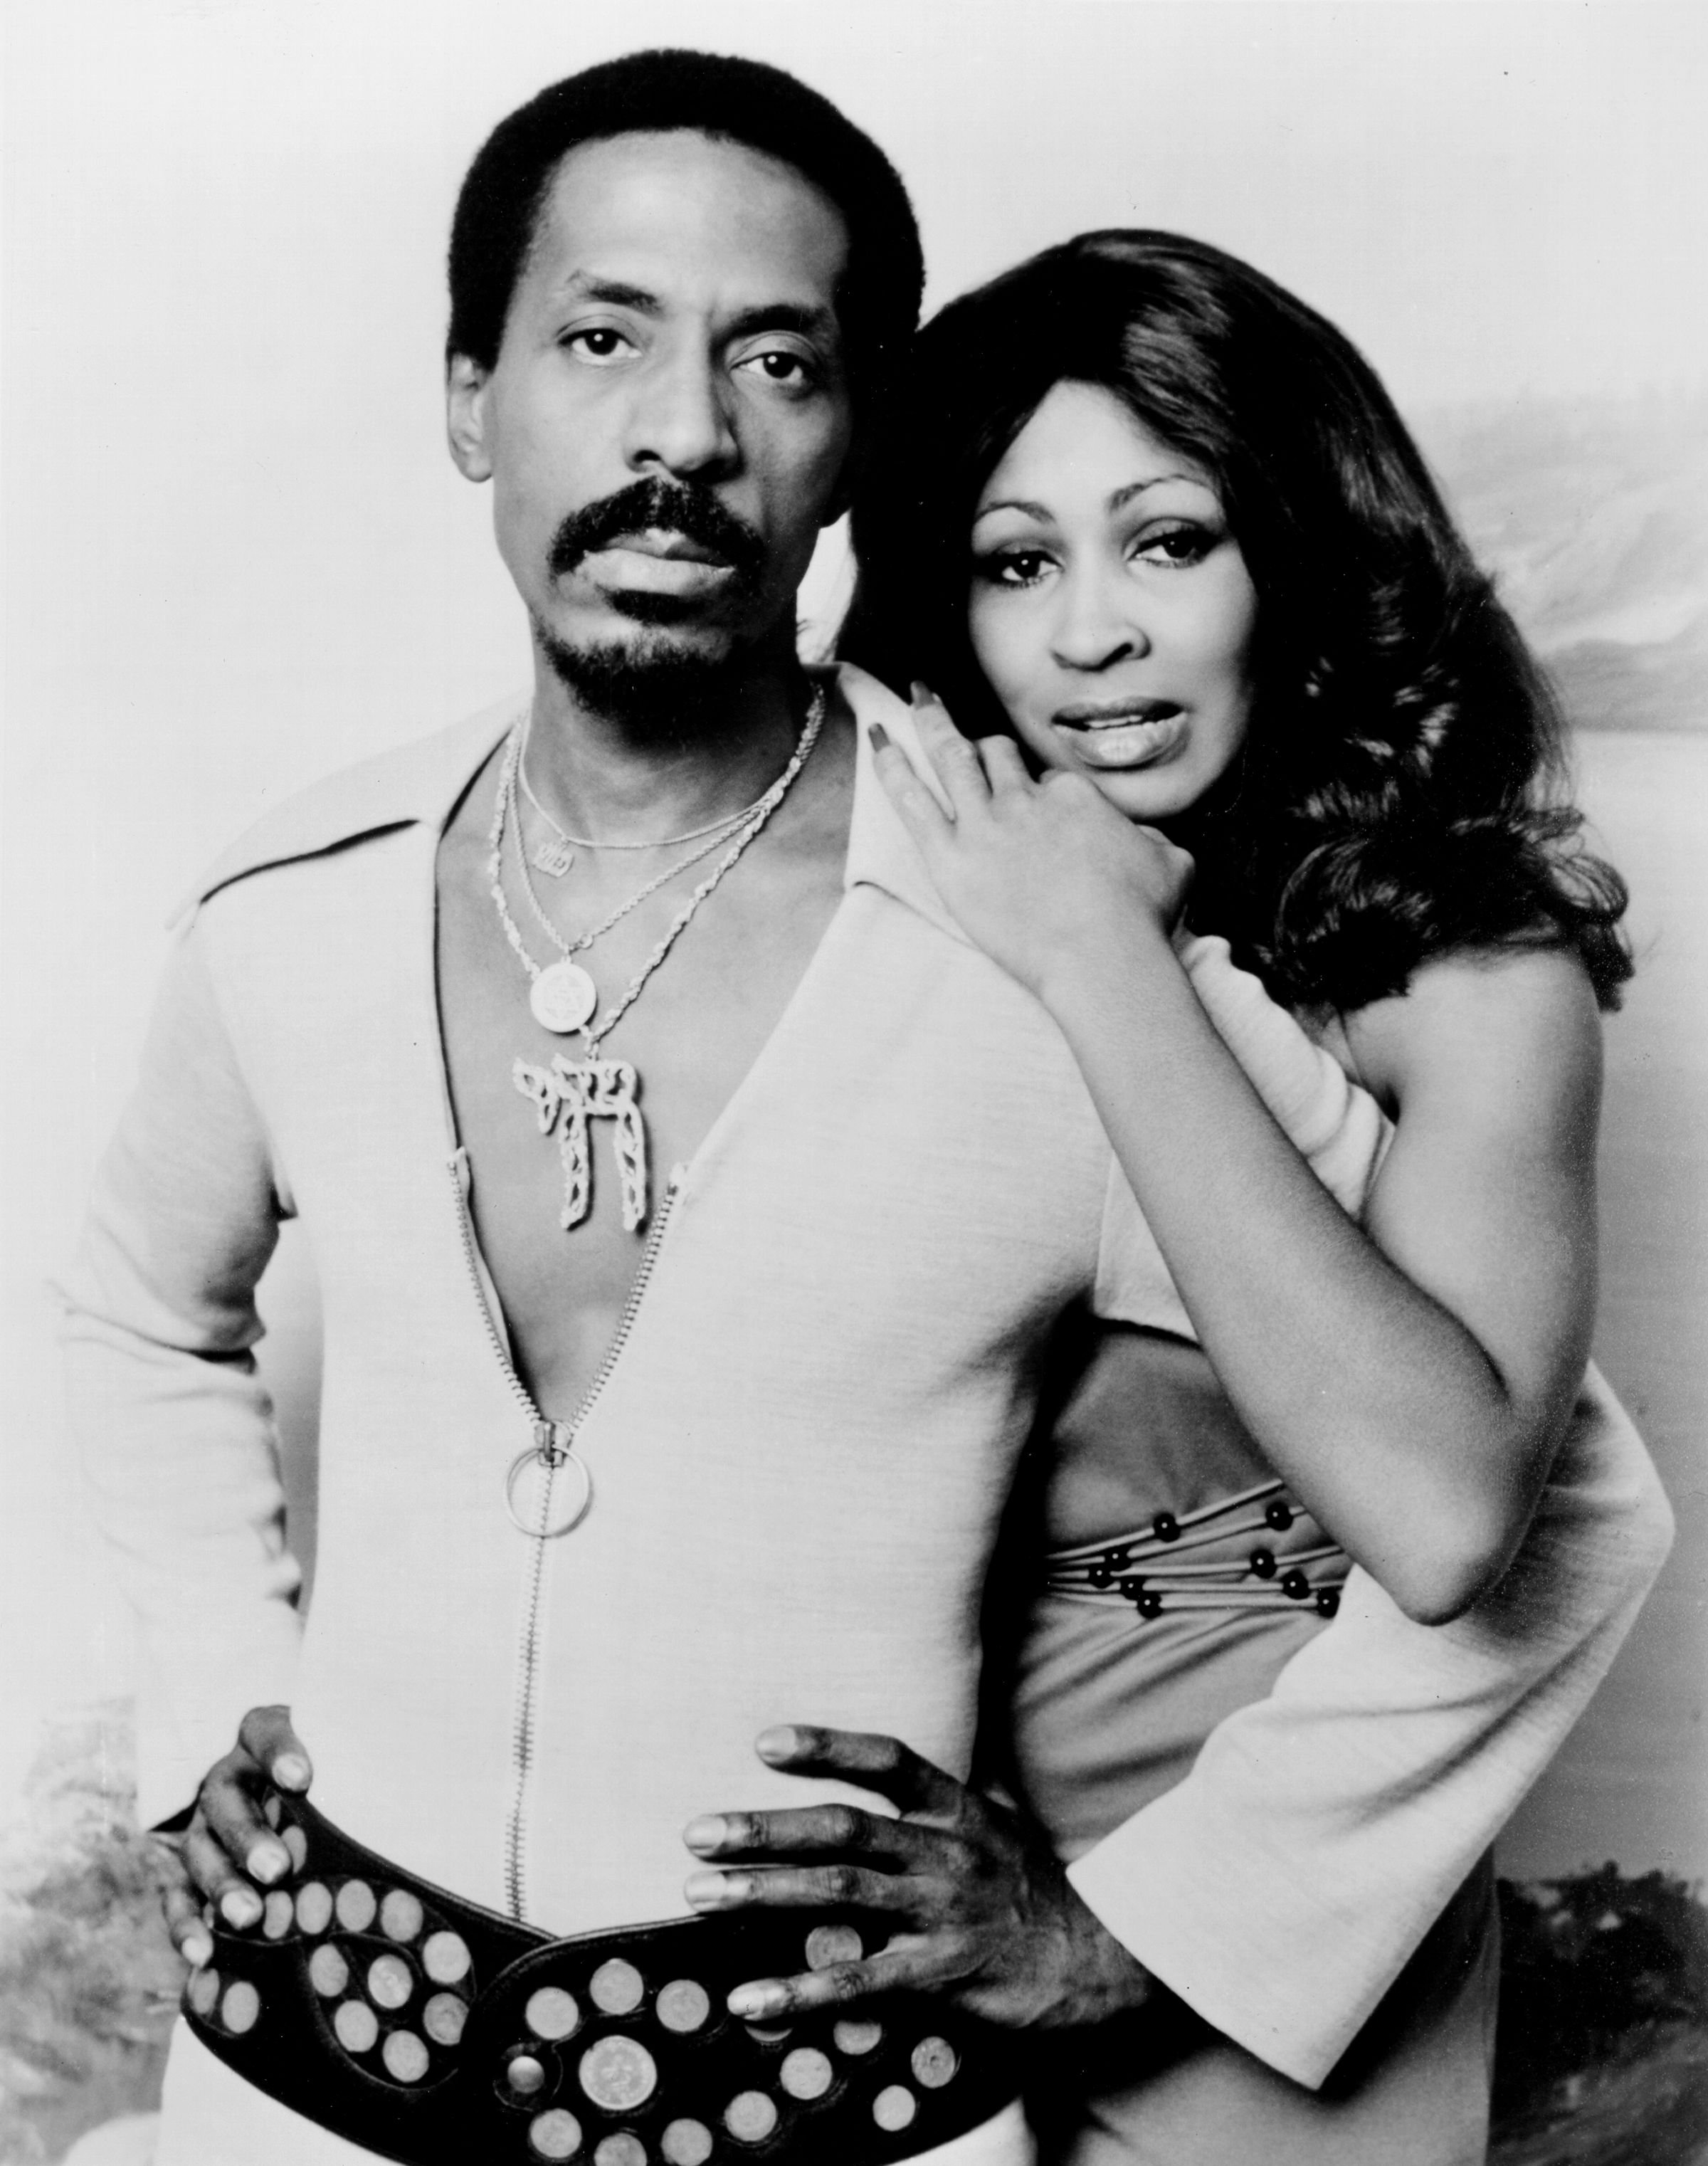 Ike and Tina Turner pose for a portrait in circa 1972 | Photo: Michael Ochs Archives/Getty Images